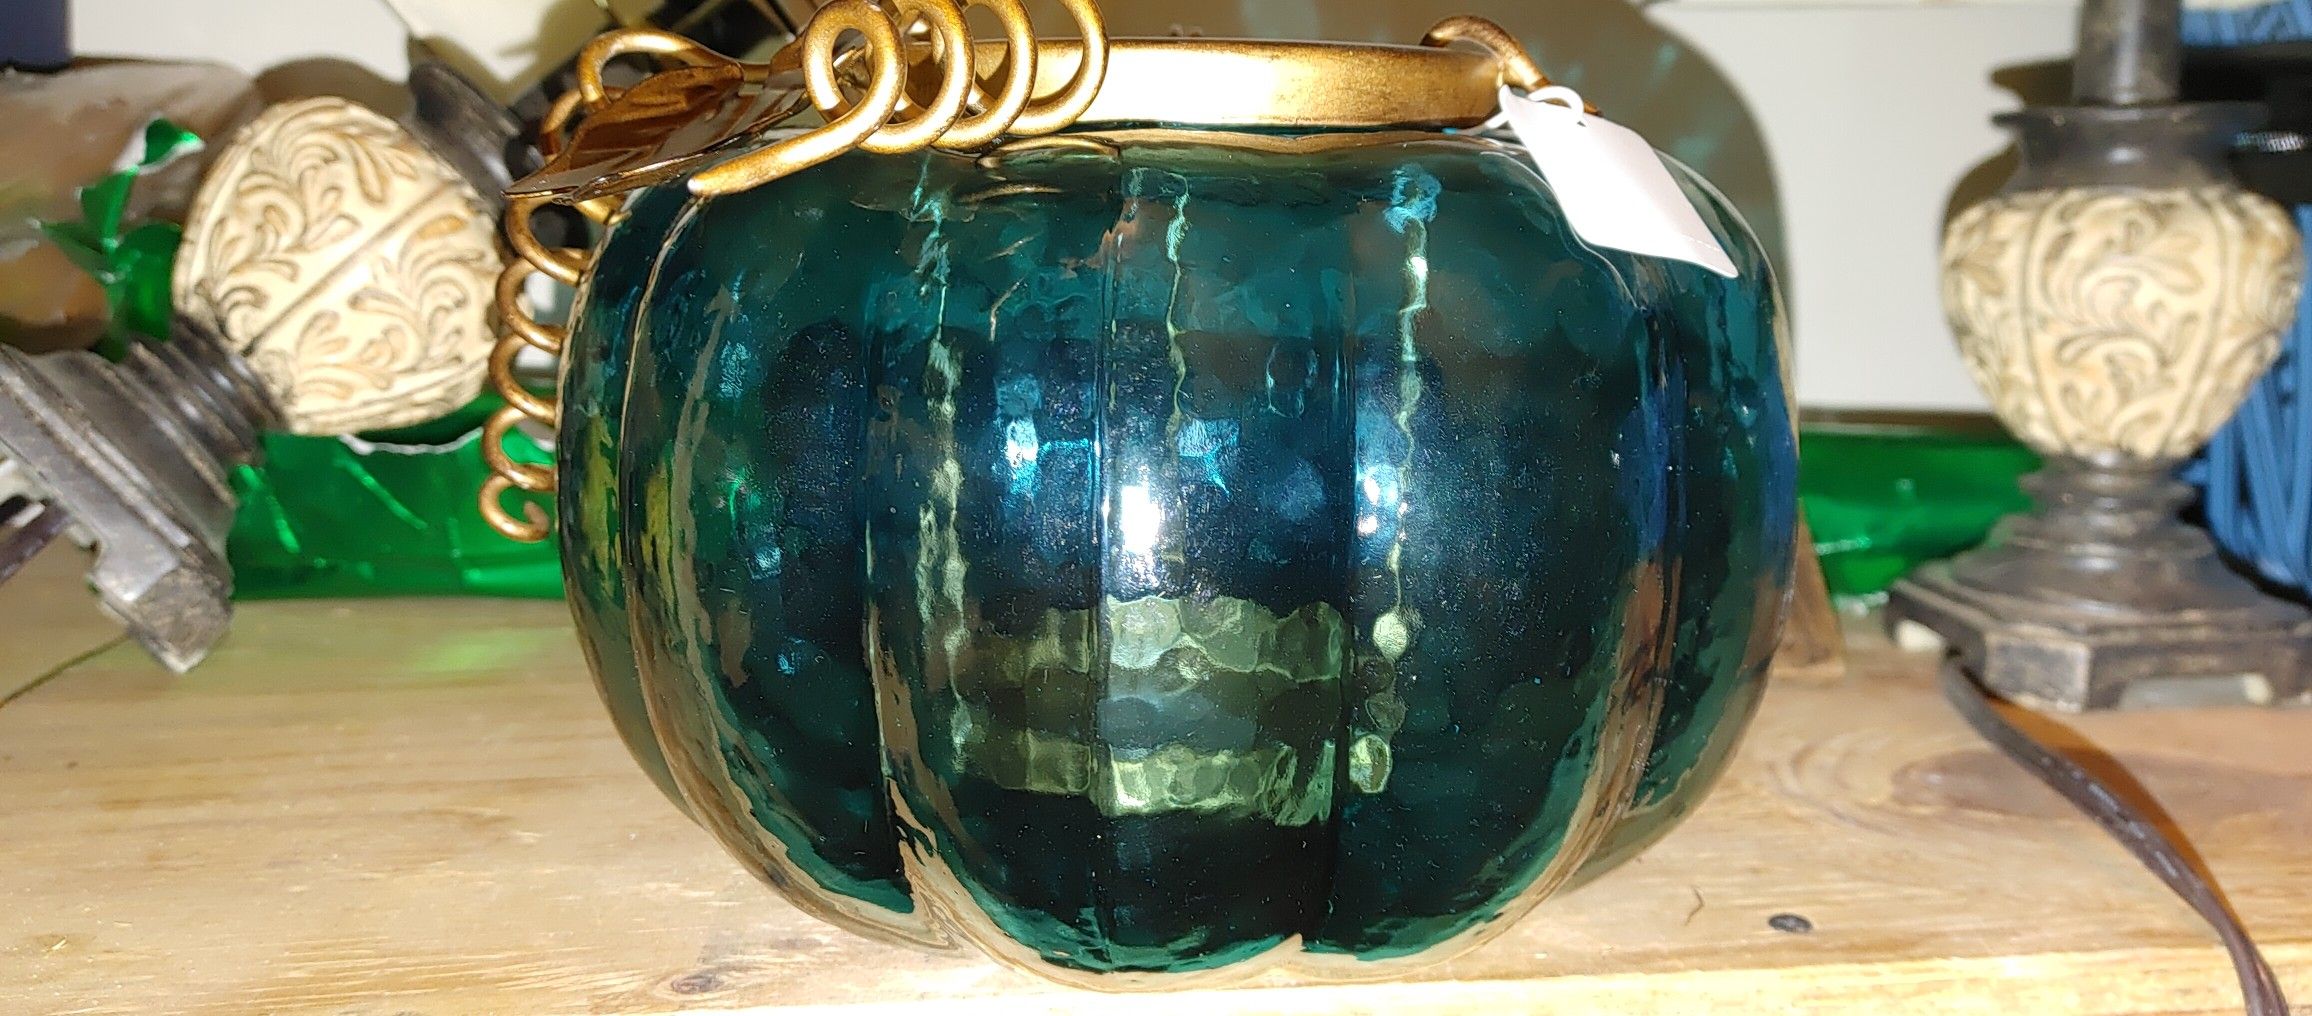 NWT Teal/blue glass pumpkin candle holder from Pier One